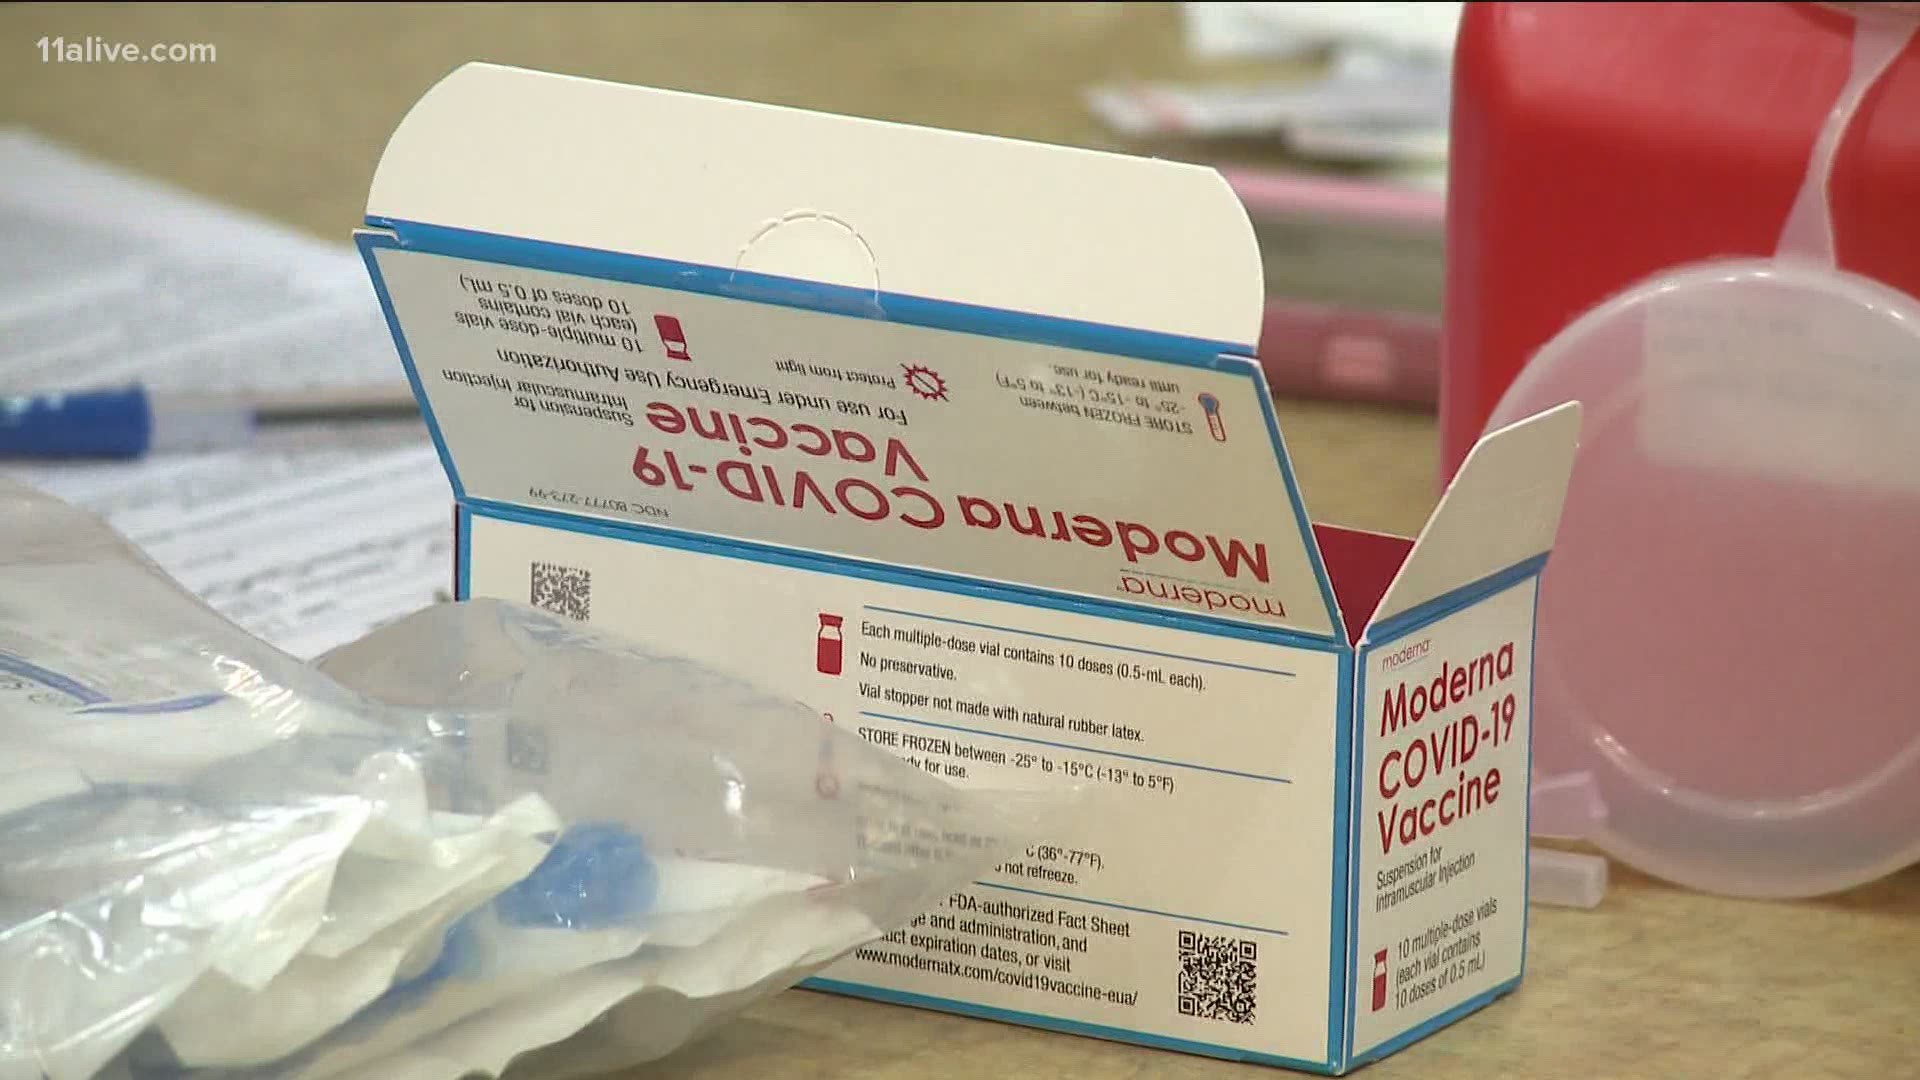 It has begun to be distributed to nursing home residents after the first doses were given to healthcare workers.